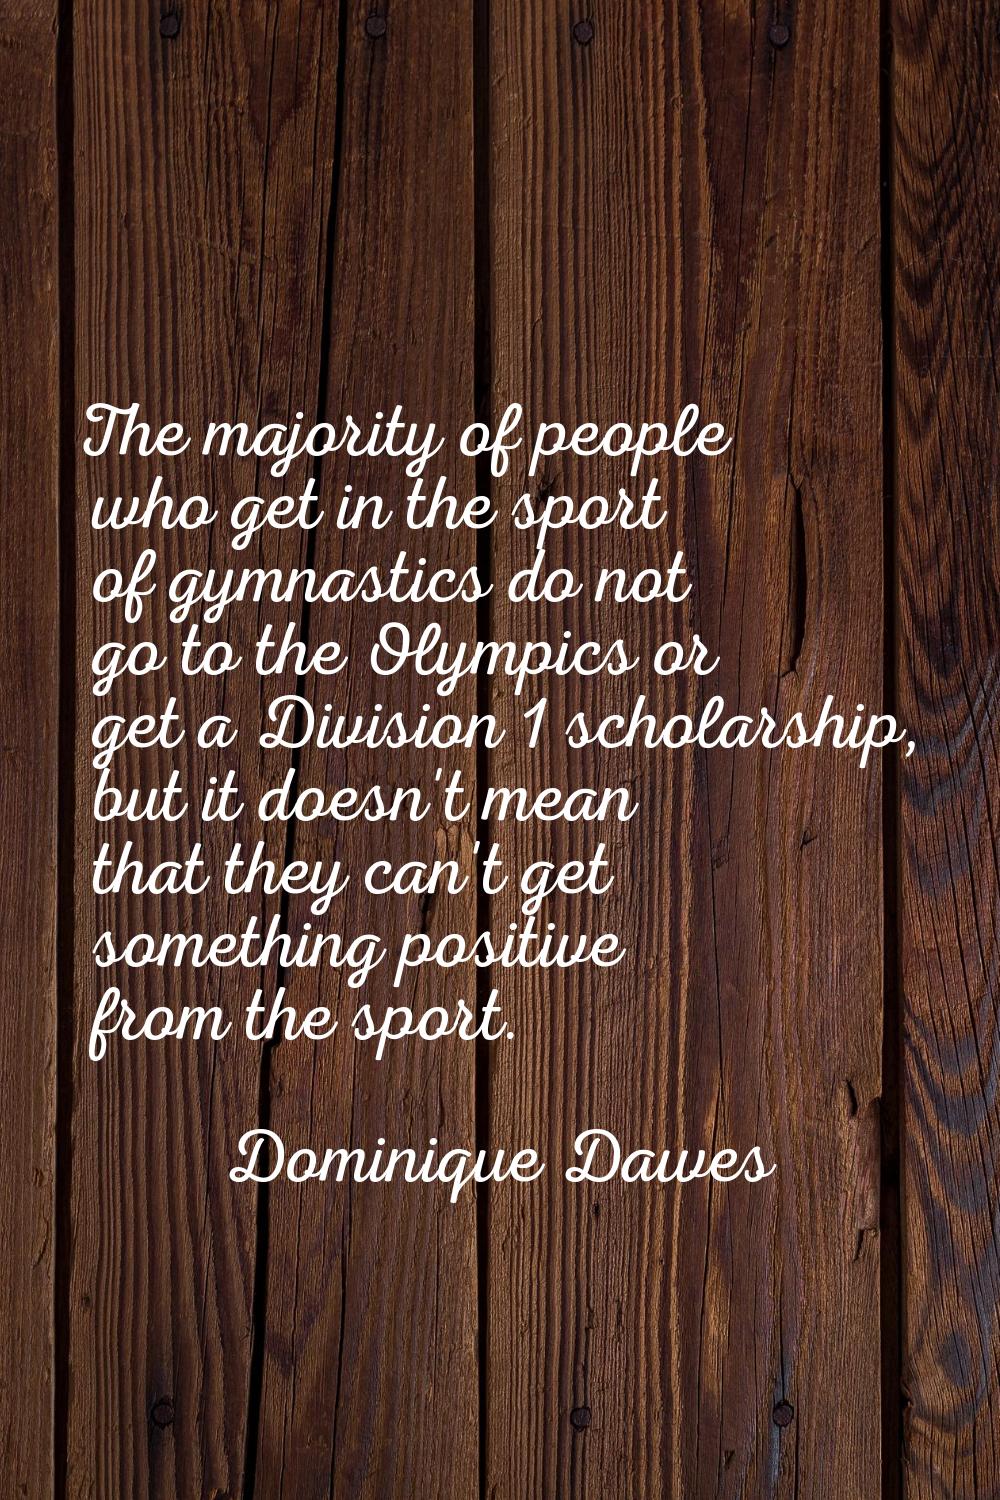 The majority of people who get in the sport of gymnastics do not go to the Olympics or get a Divisi